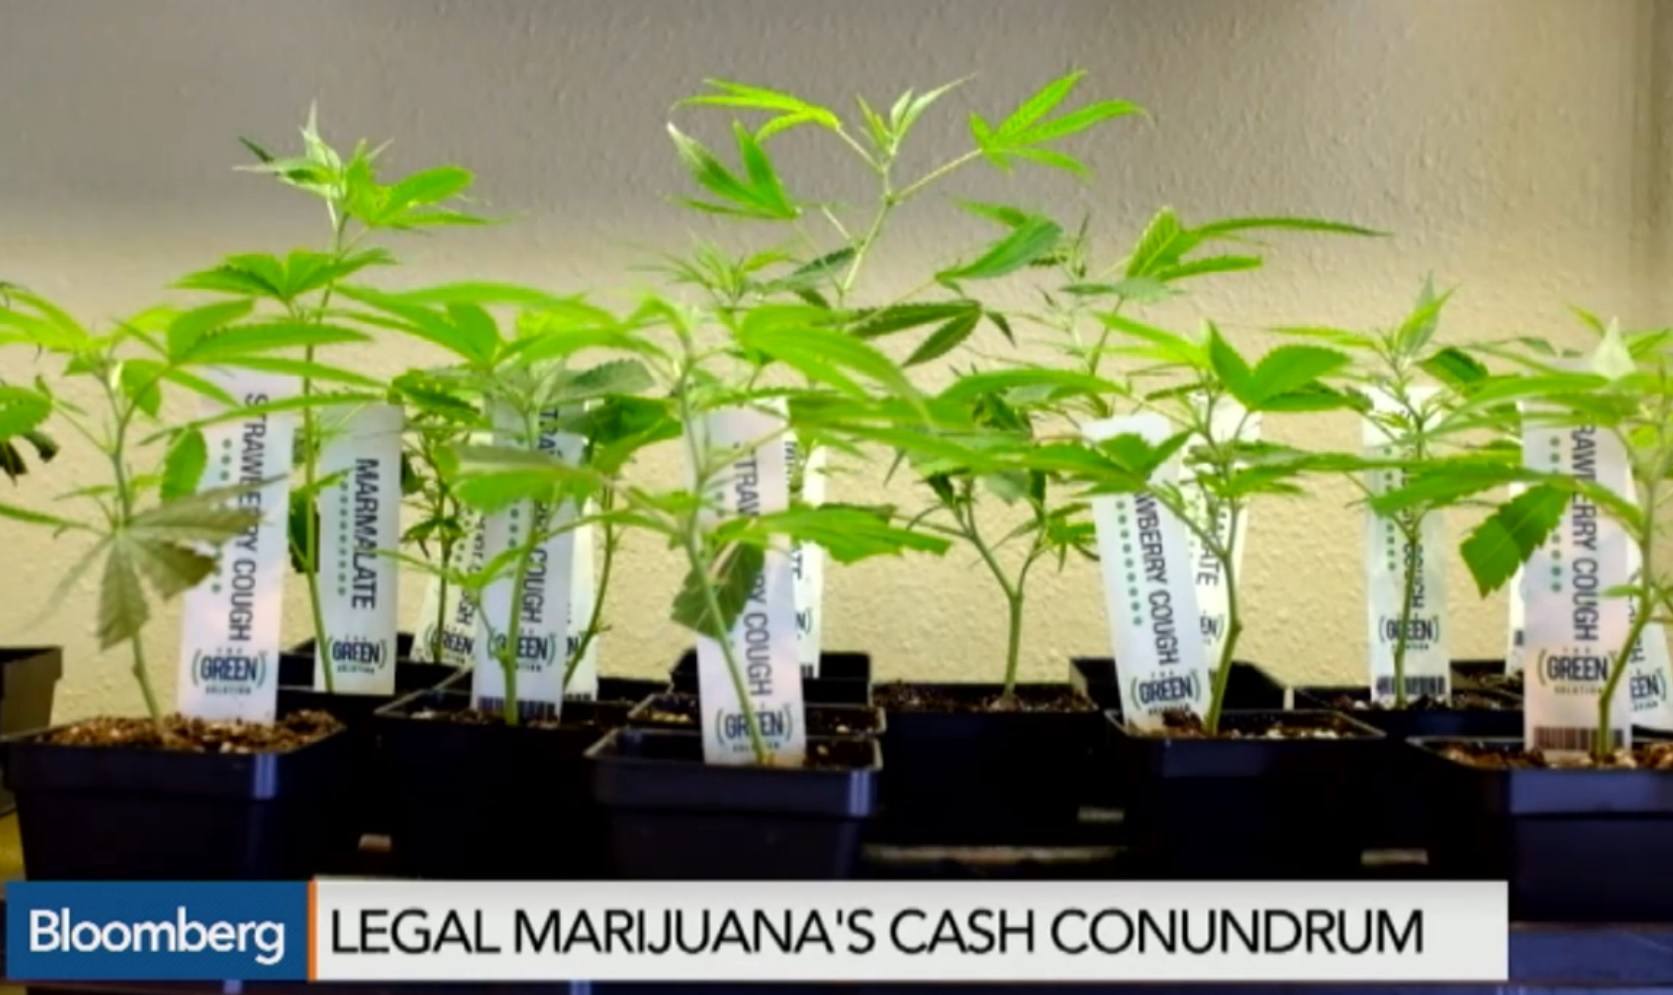 Image of Legal Marijuana plants available for sale 